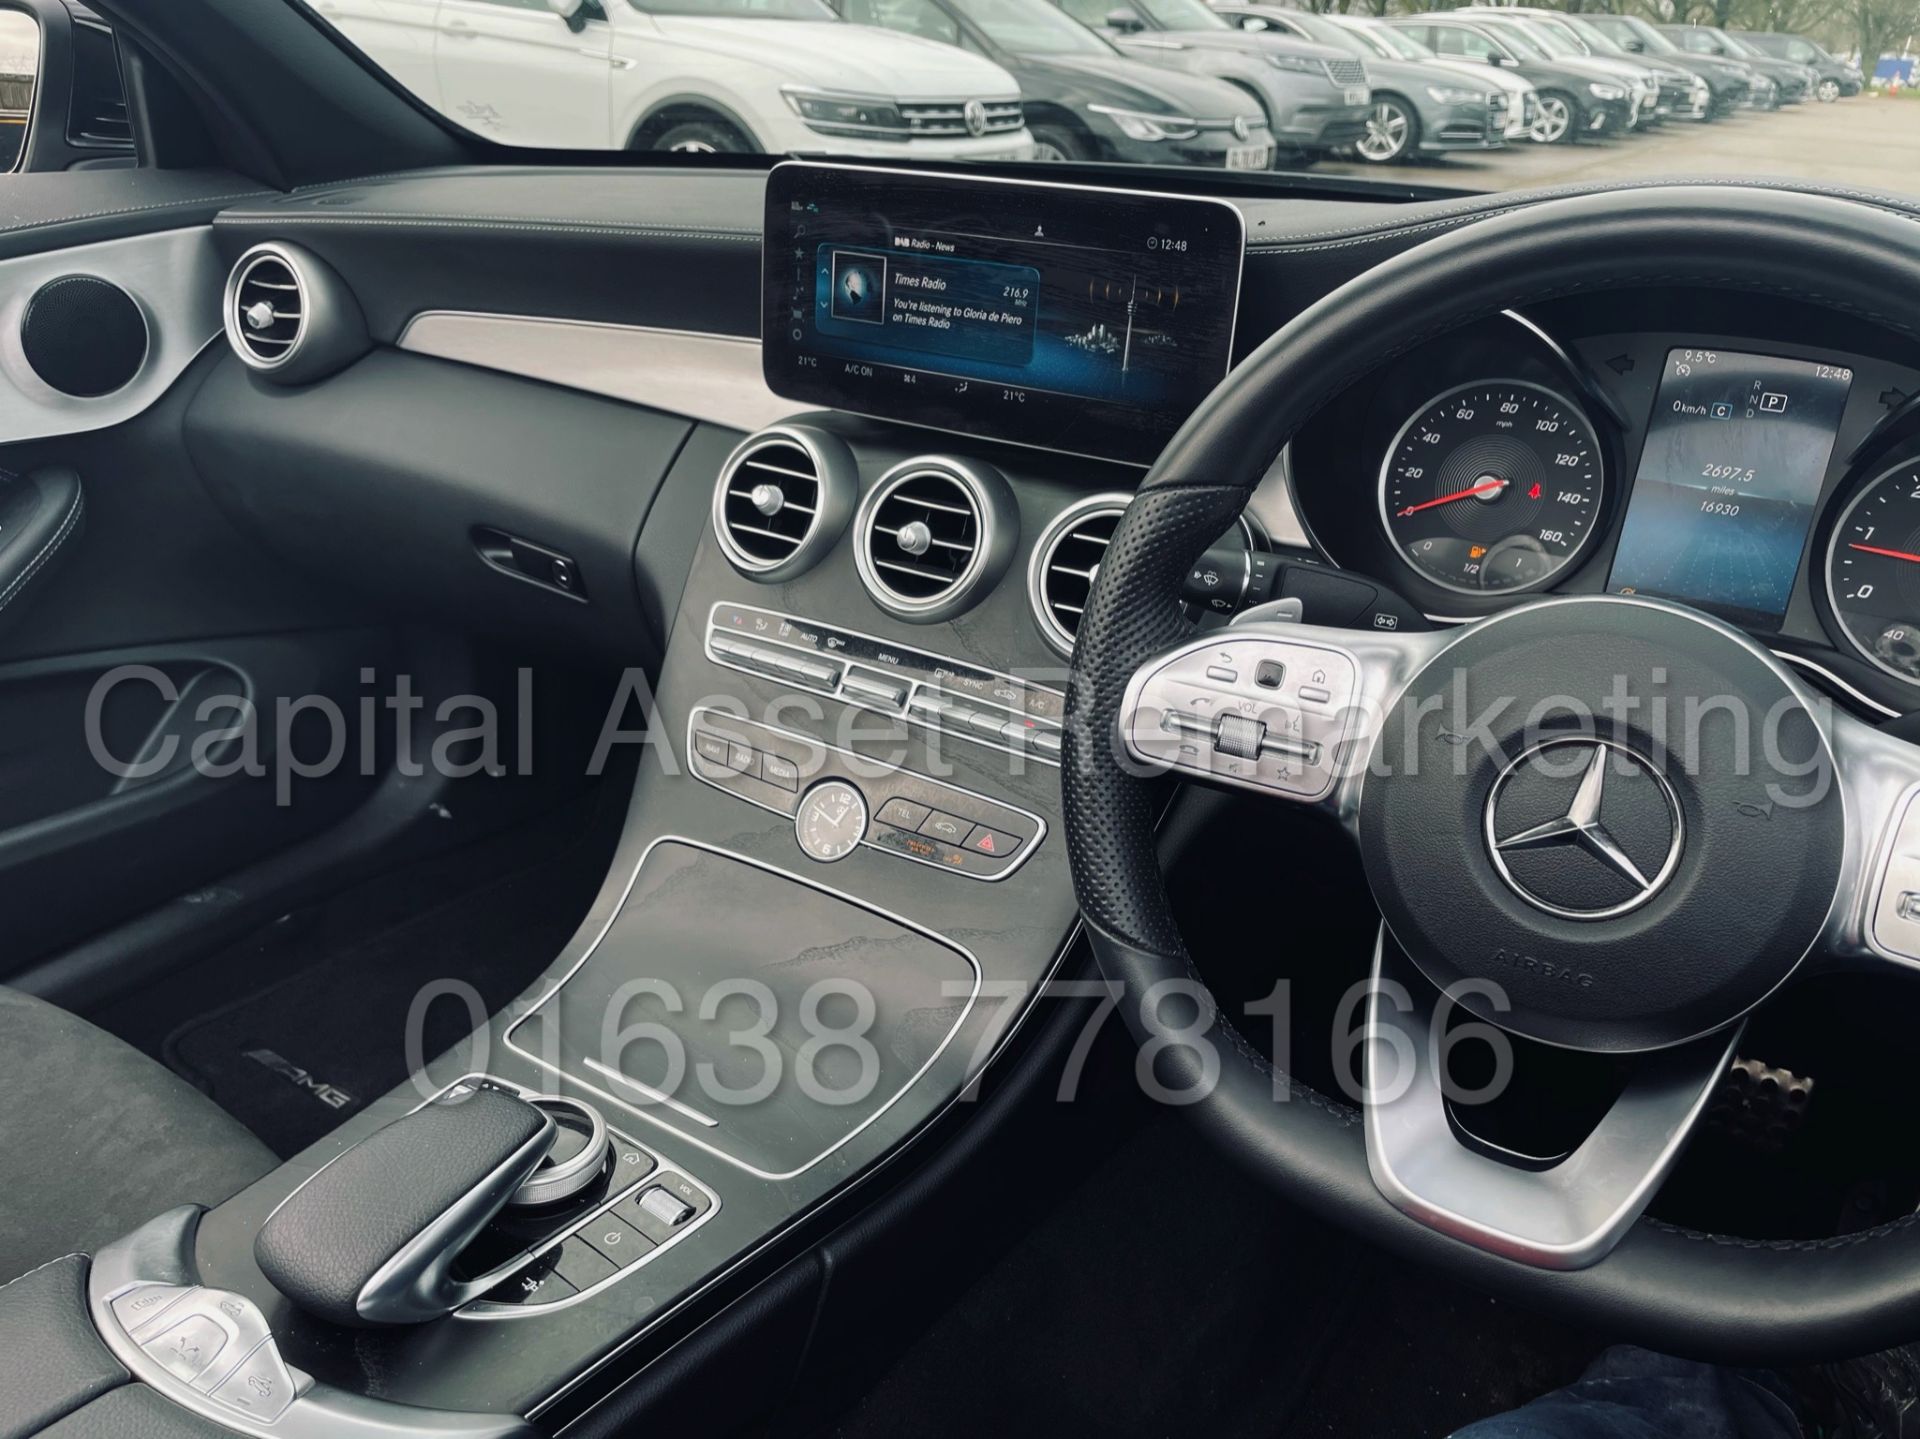 (ON SALE) MERCEDES-BENZ C220D *AMG LINE - CABRIOLET* (2019) '9G TRONIC AUTO - LEATHER - SAT NAV' - Image 46 of 56